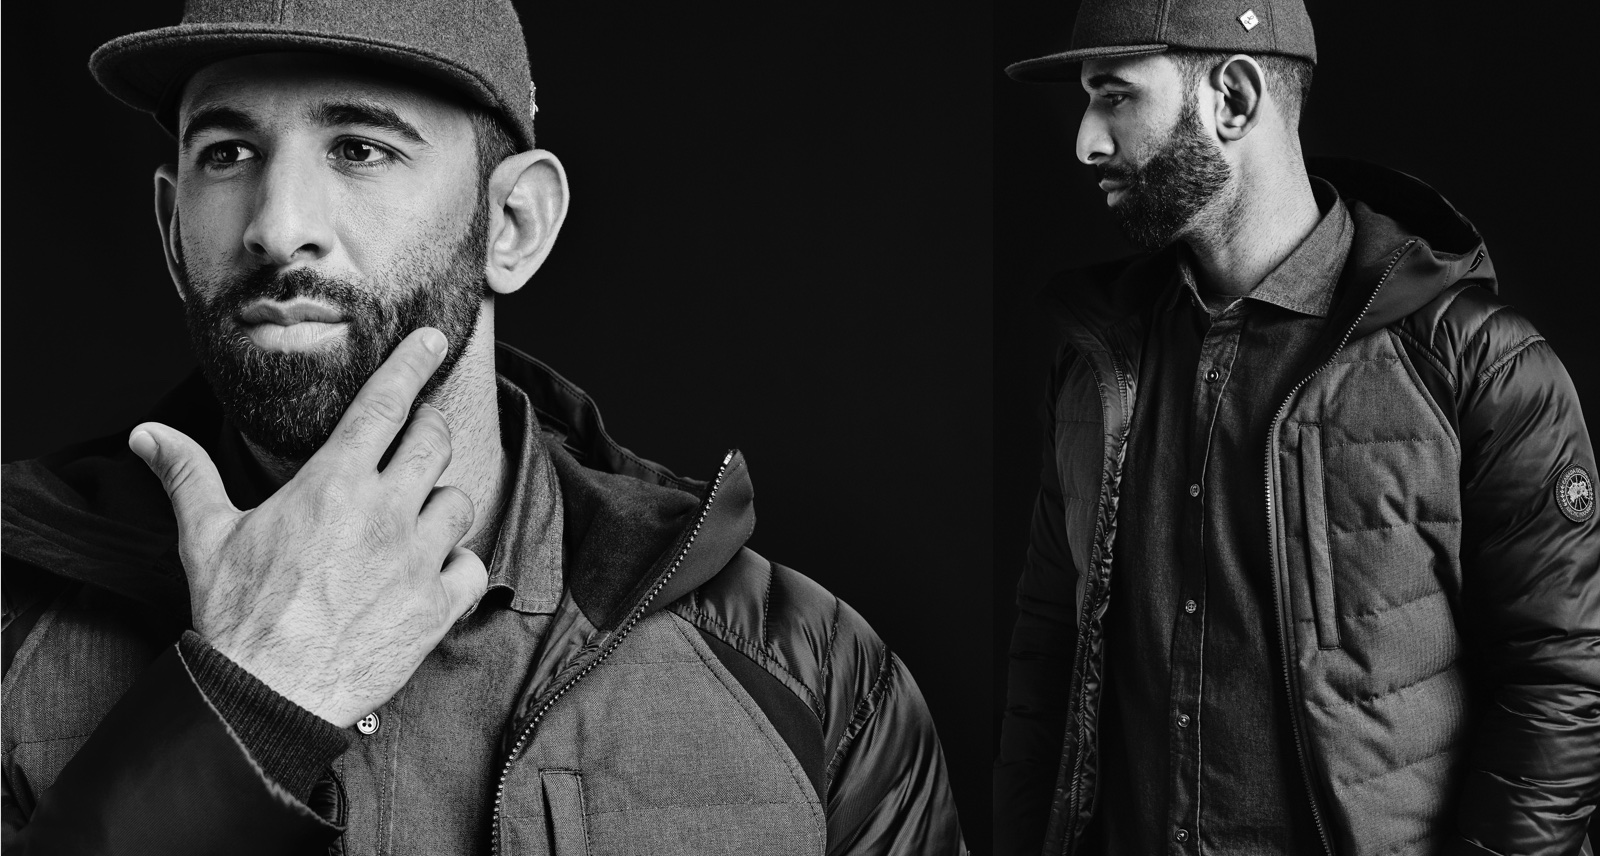 Canada Goose jackets online discounts - Jose Bautista's New Canada Goose Jacket Is An Absolute Dinger ...